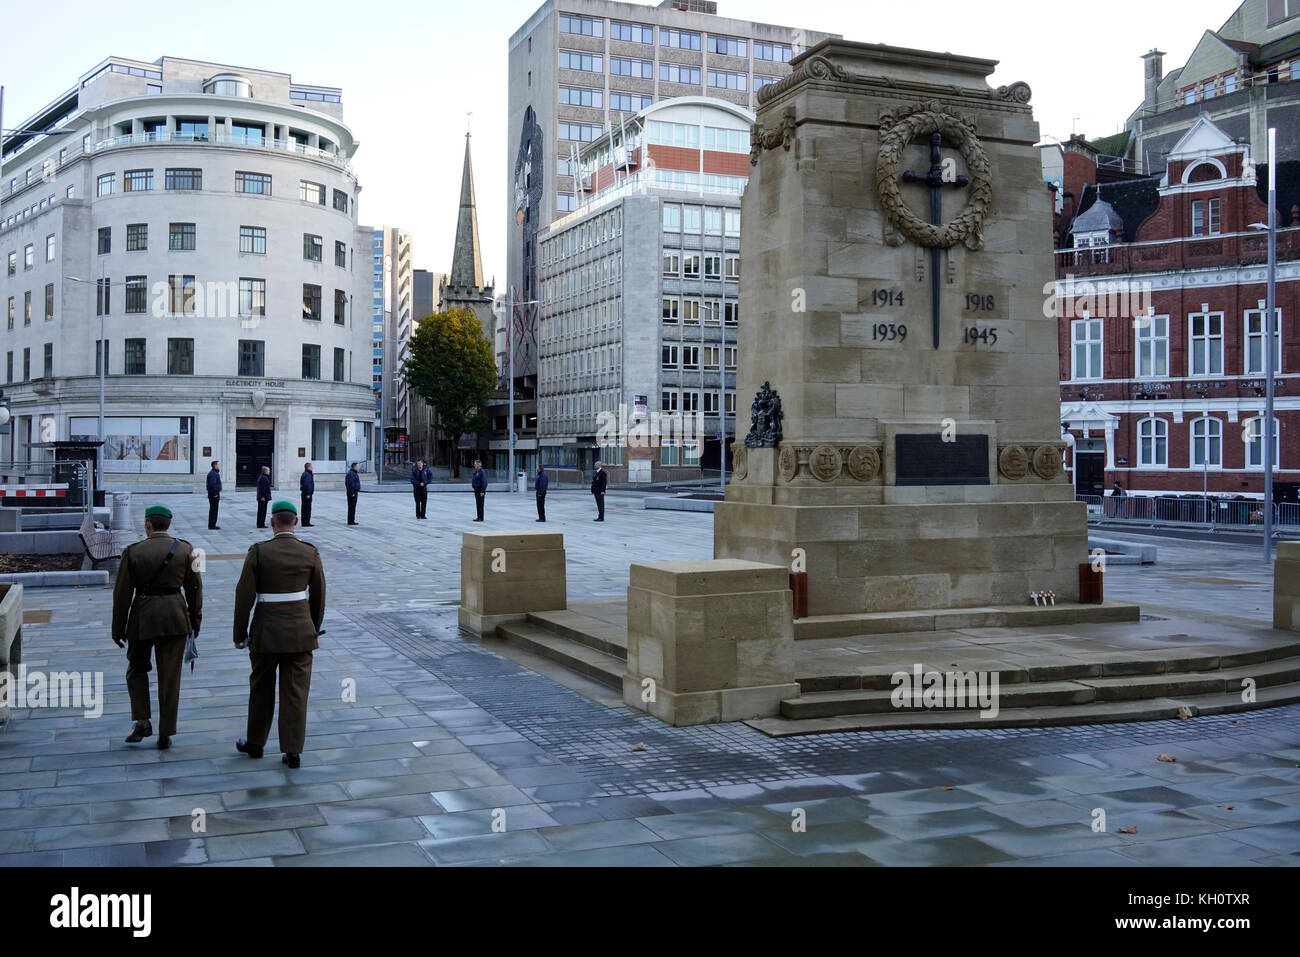 Bristol, United Kingdom, 12 November 2017. Early morning preparations on a bright and brisk day at the newly refurbished Cenotaph in Bristol, ahead of the Remembrance Day service. Credit: mfimage/Alamy Live News Stock Photo